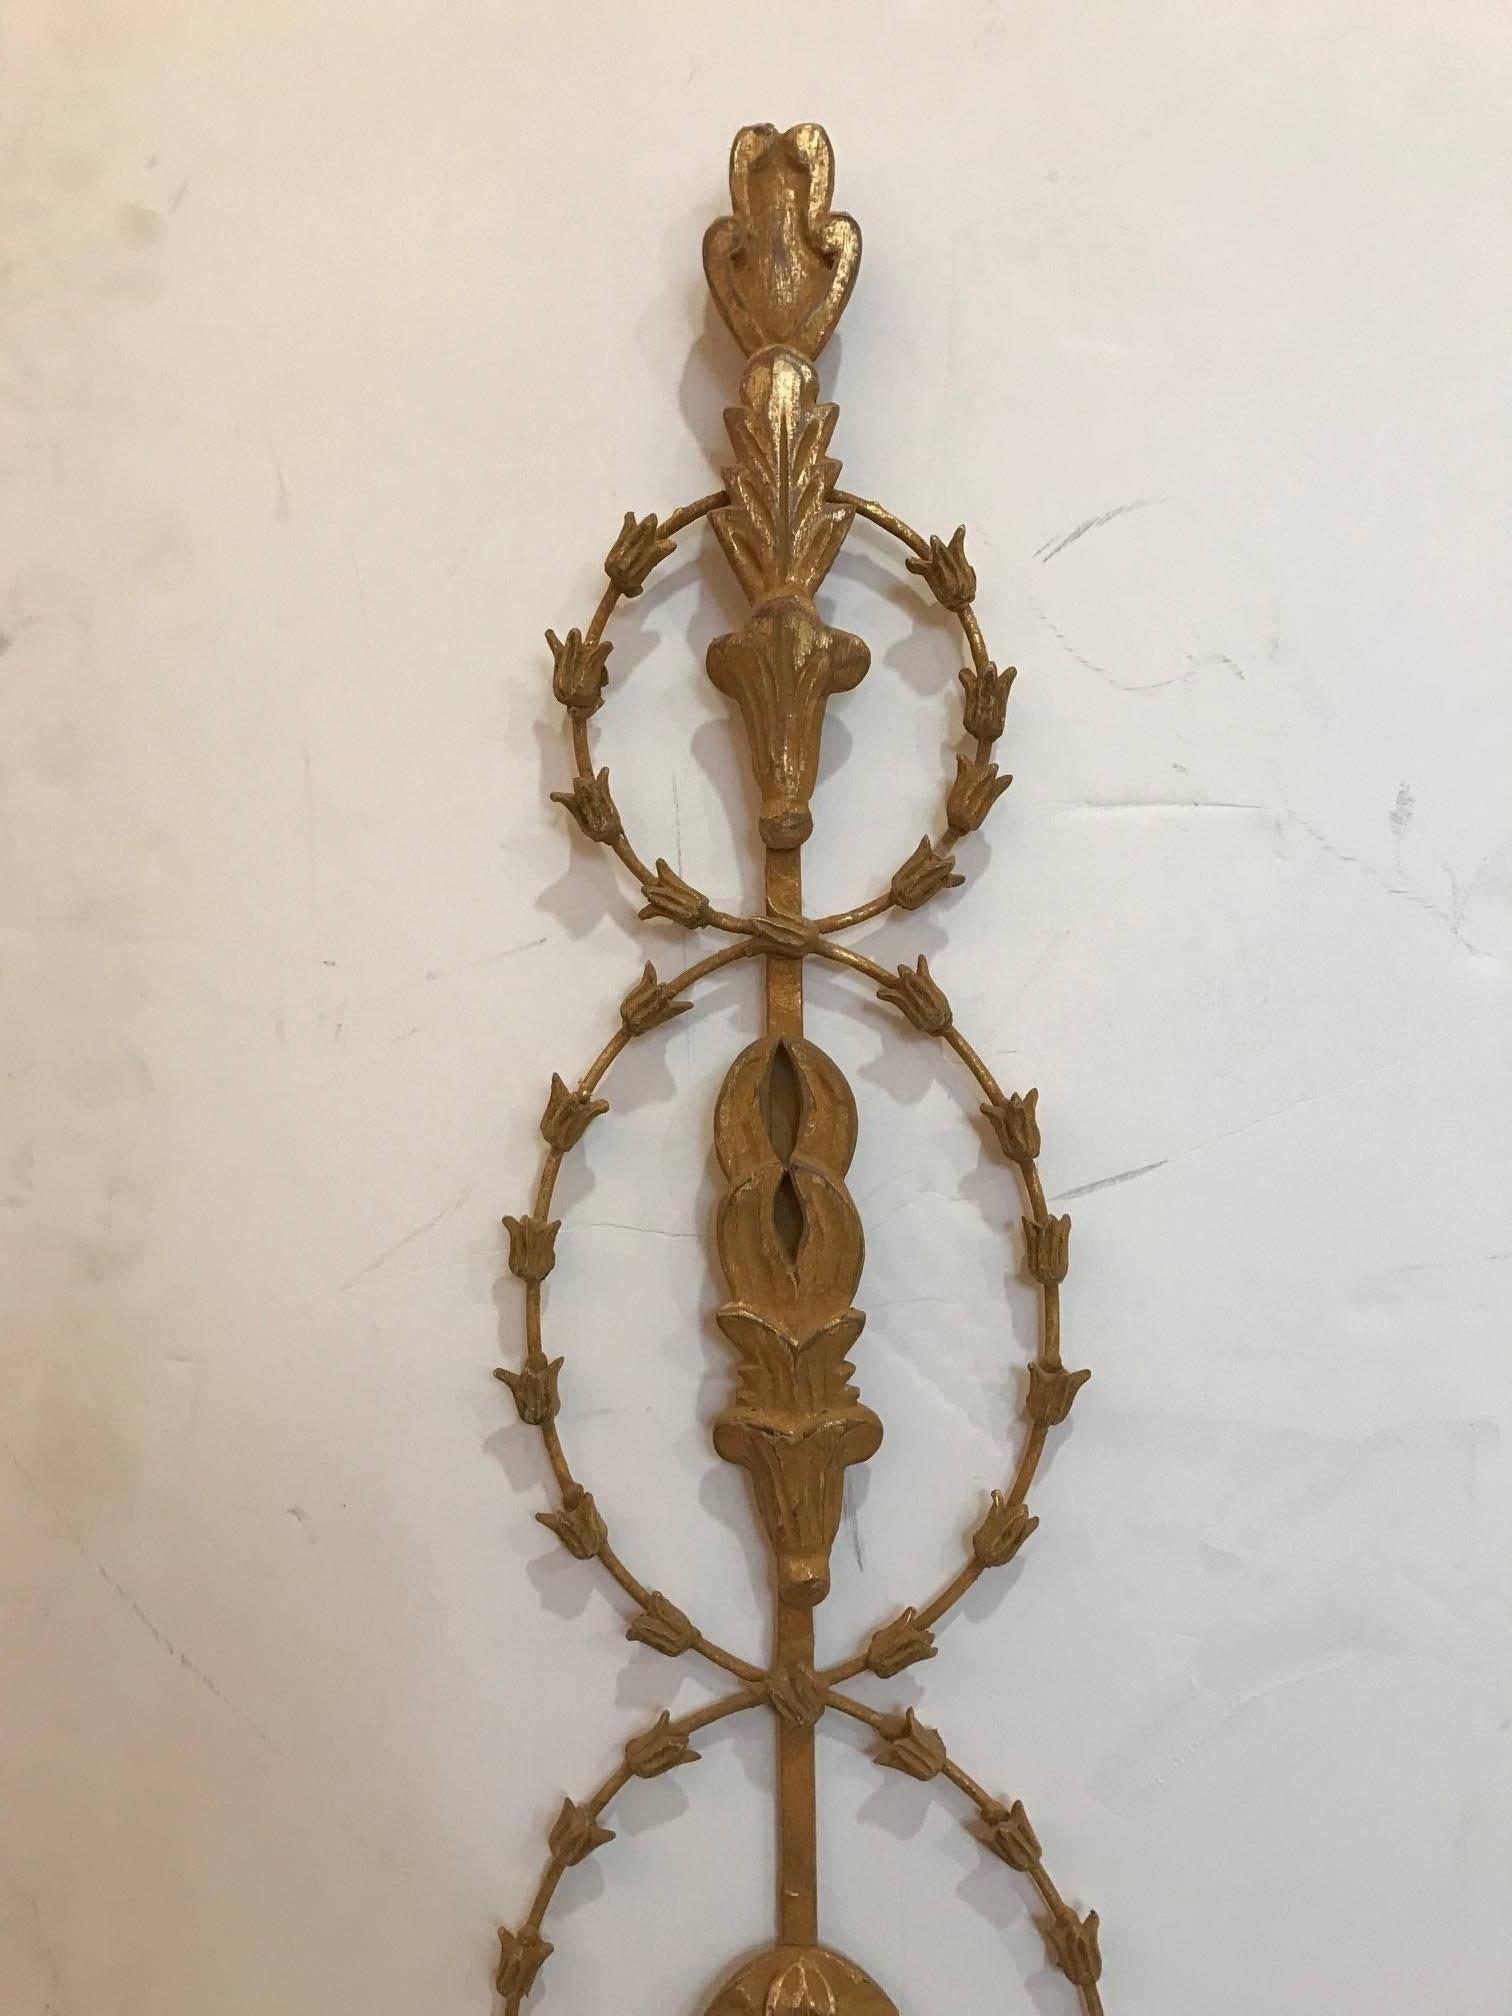 Elegant pair of giltwood and metal English Adam style candle sconces. The leafed garlands encircle the center body with two scrolled candle arms with draped garland in between. These are made in Italy but in the English taste.